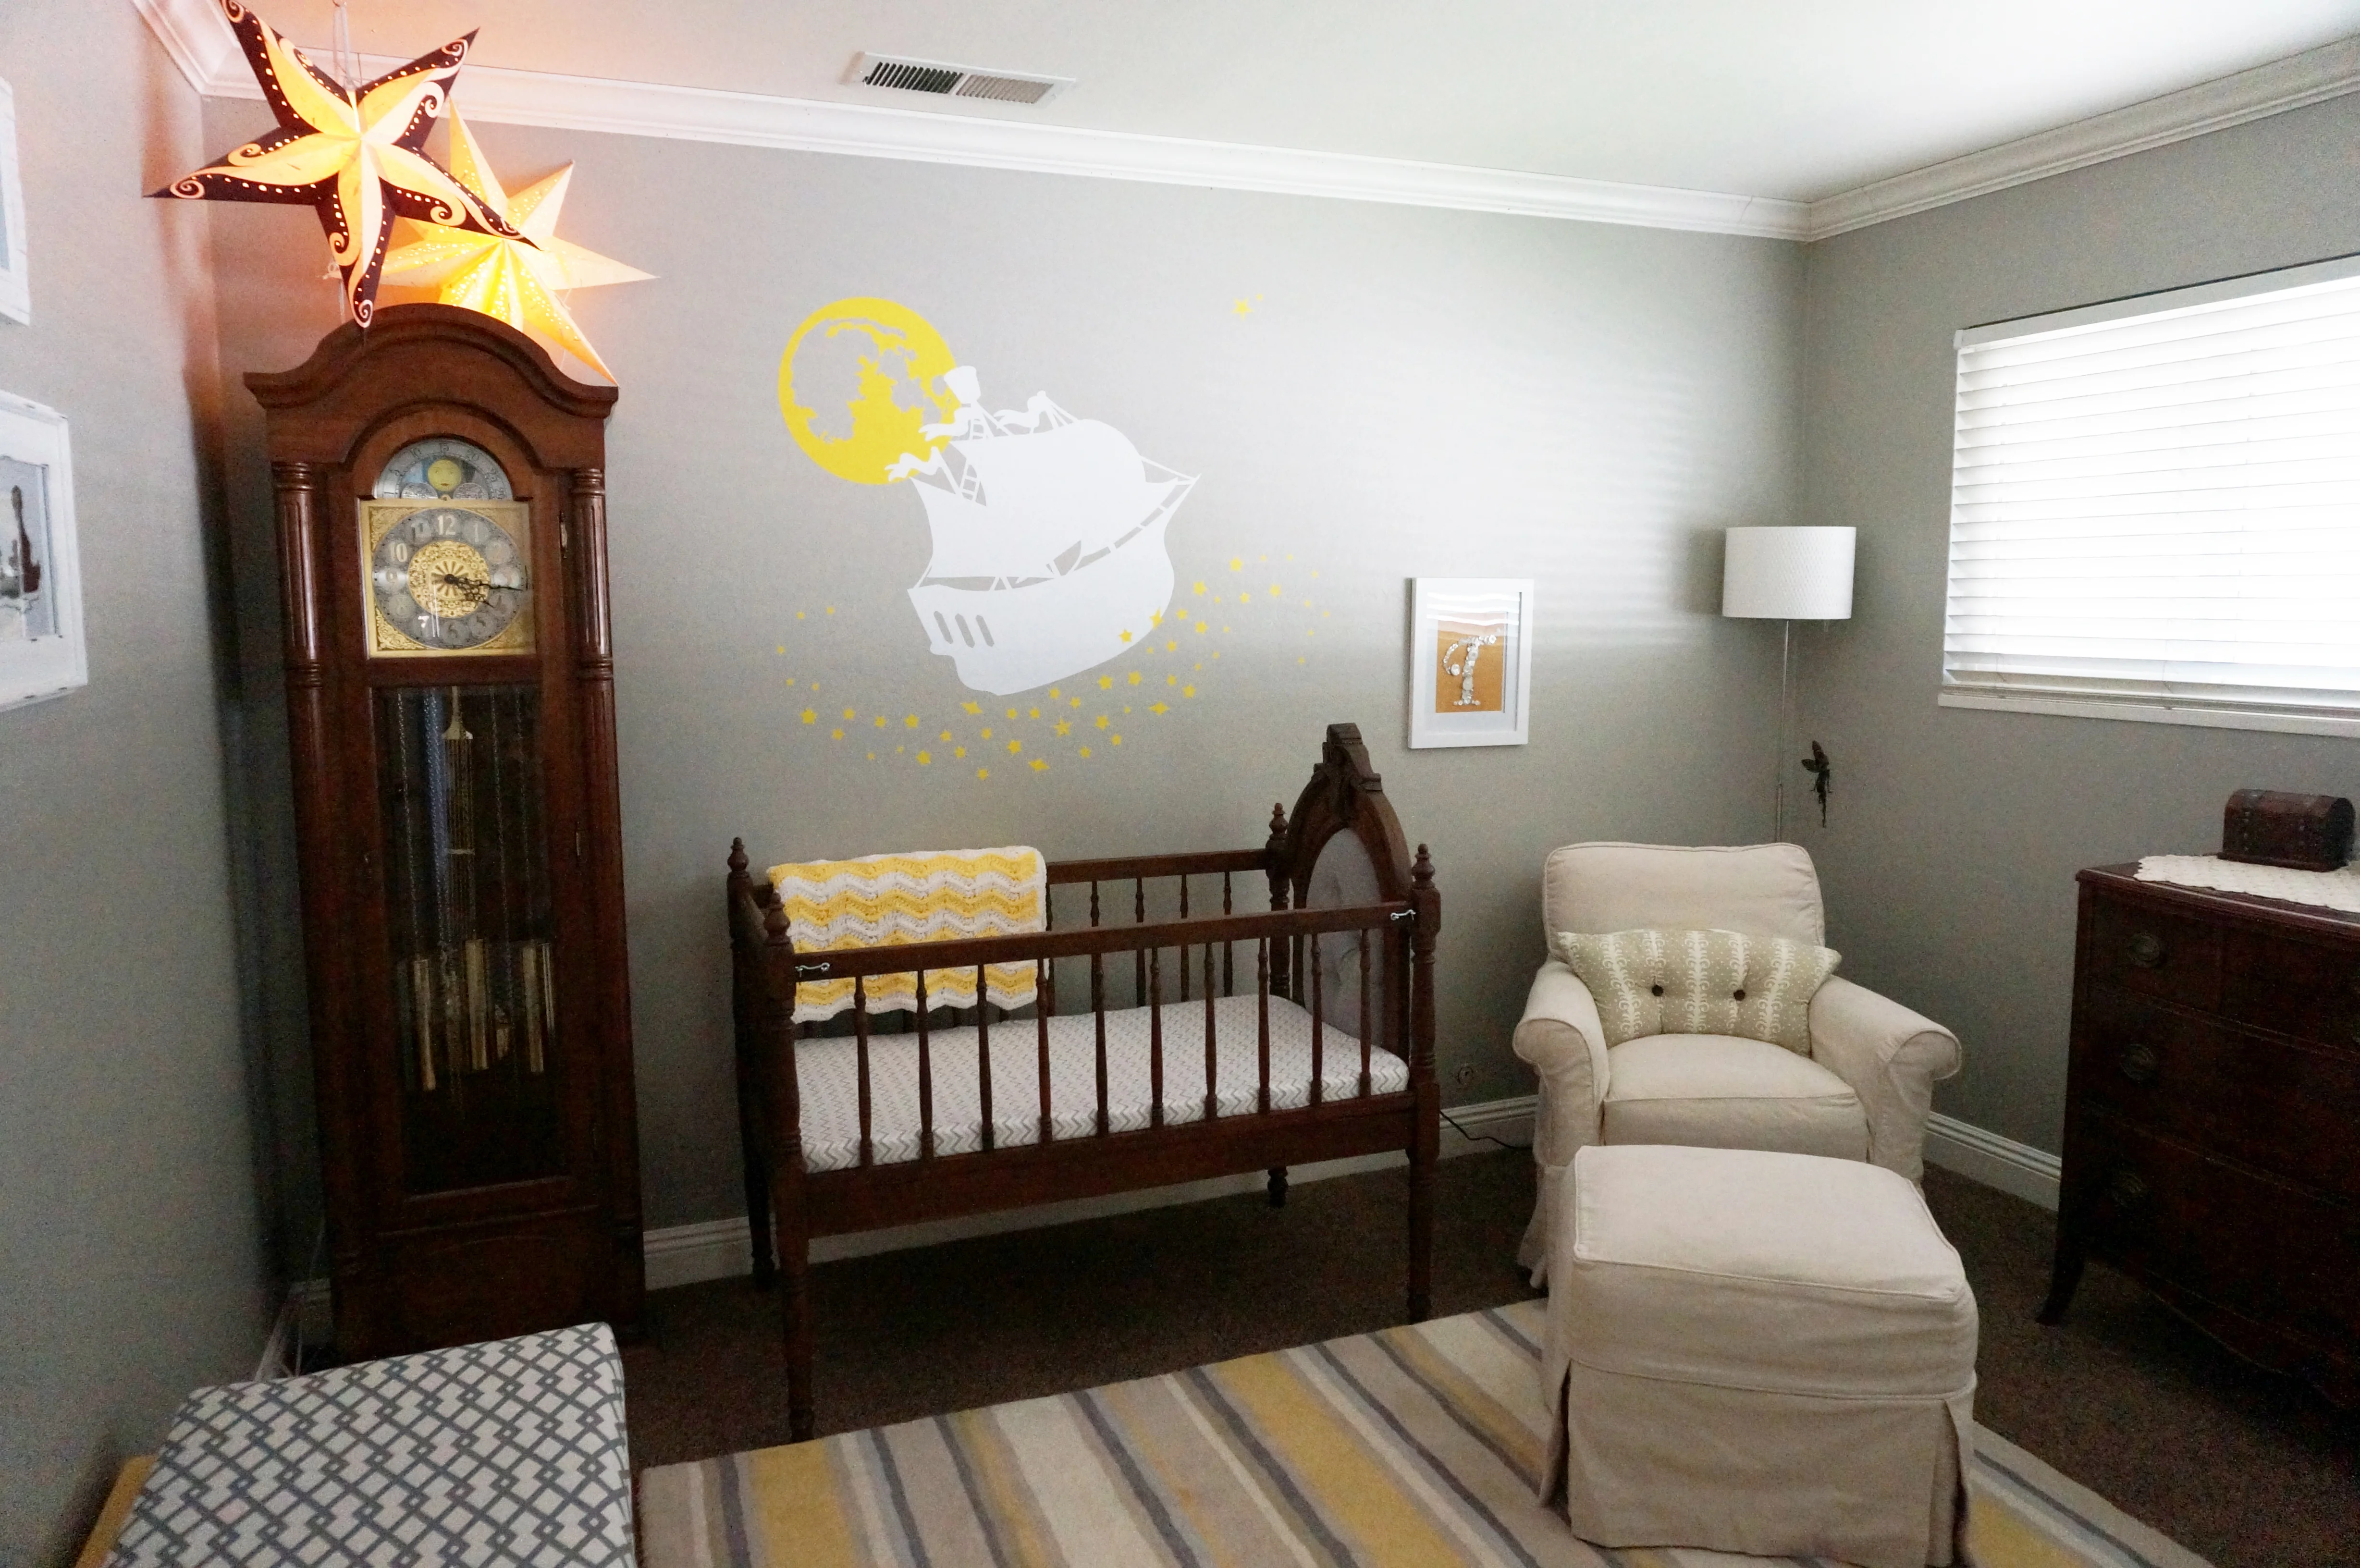 Grandfather Clock in this Neverland Nursery